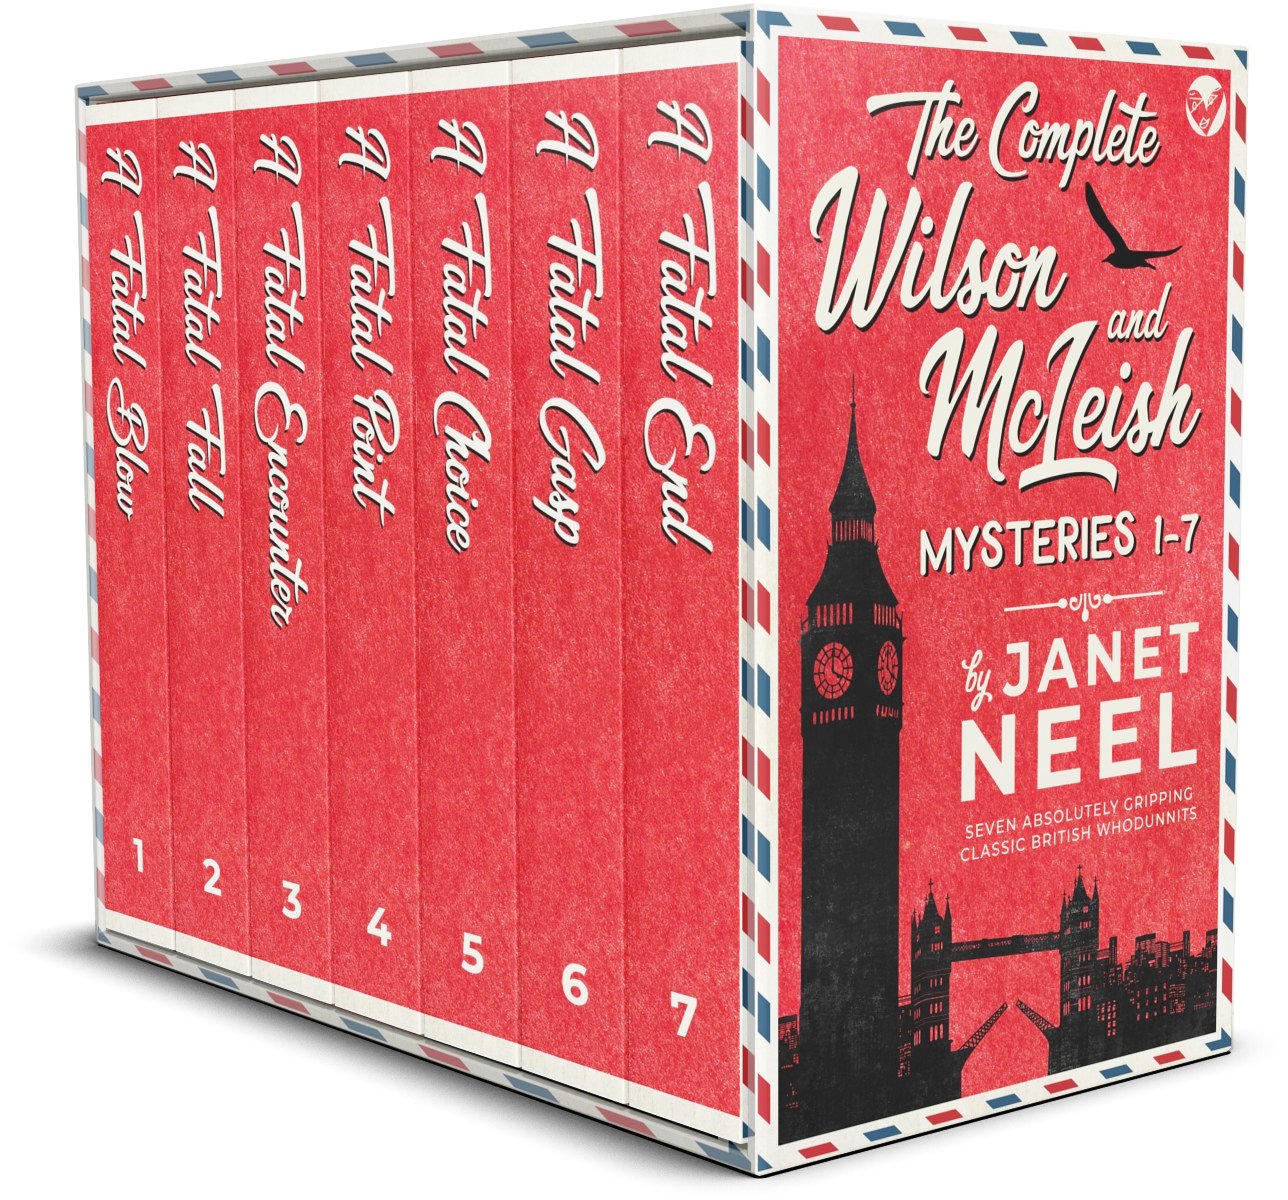 COMPLETE WILSON AND MCLEISH BOXSET cover publish.jpg